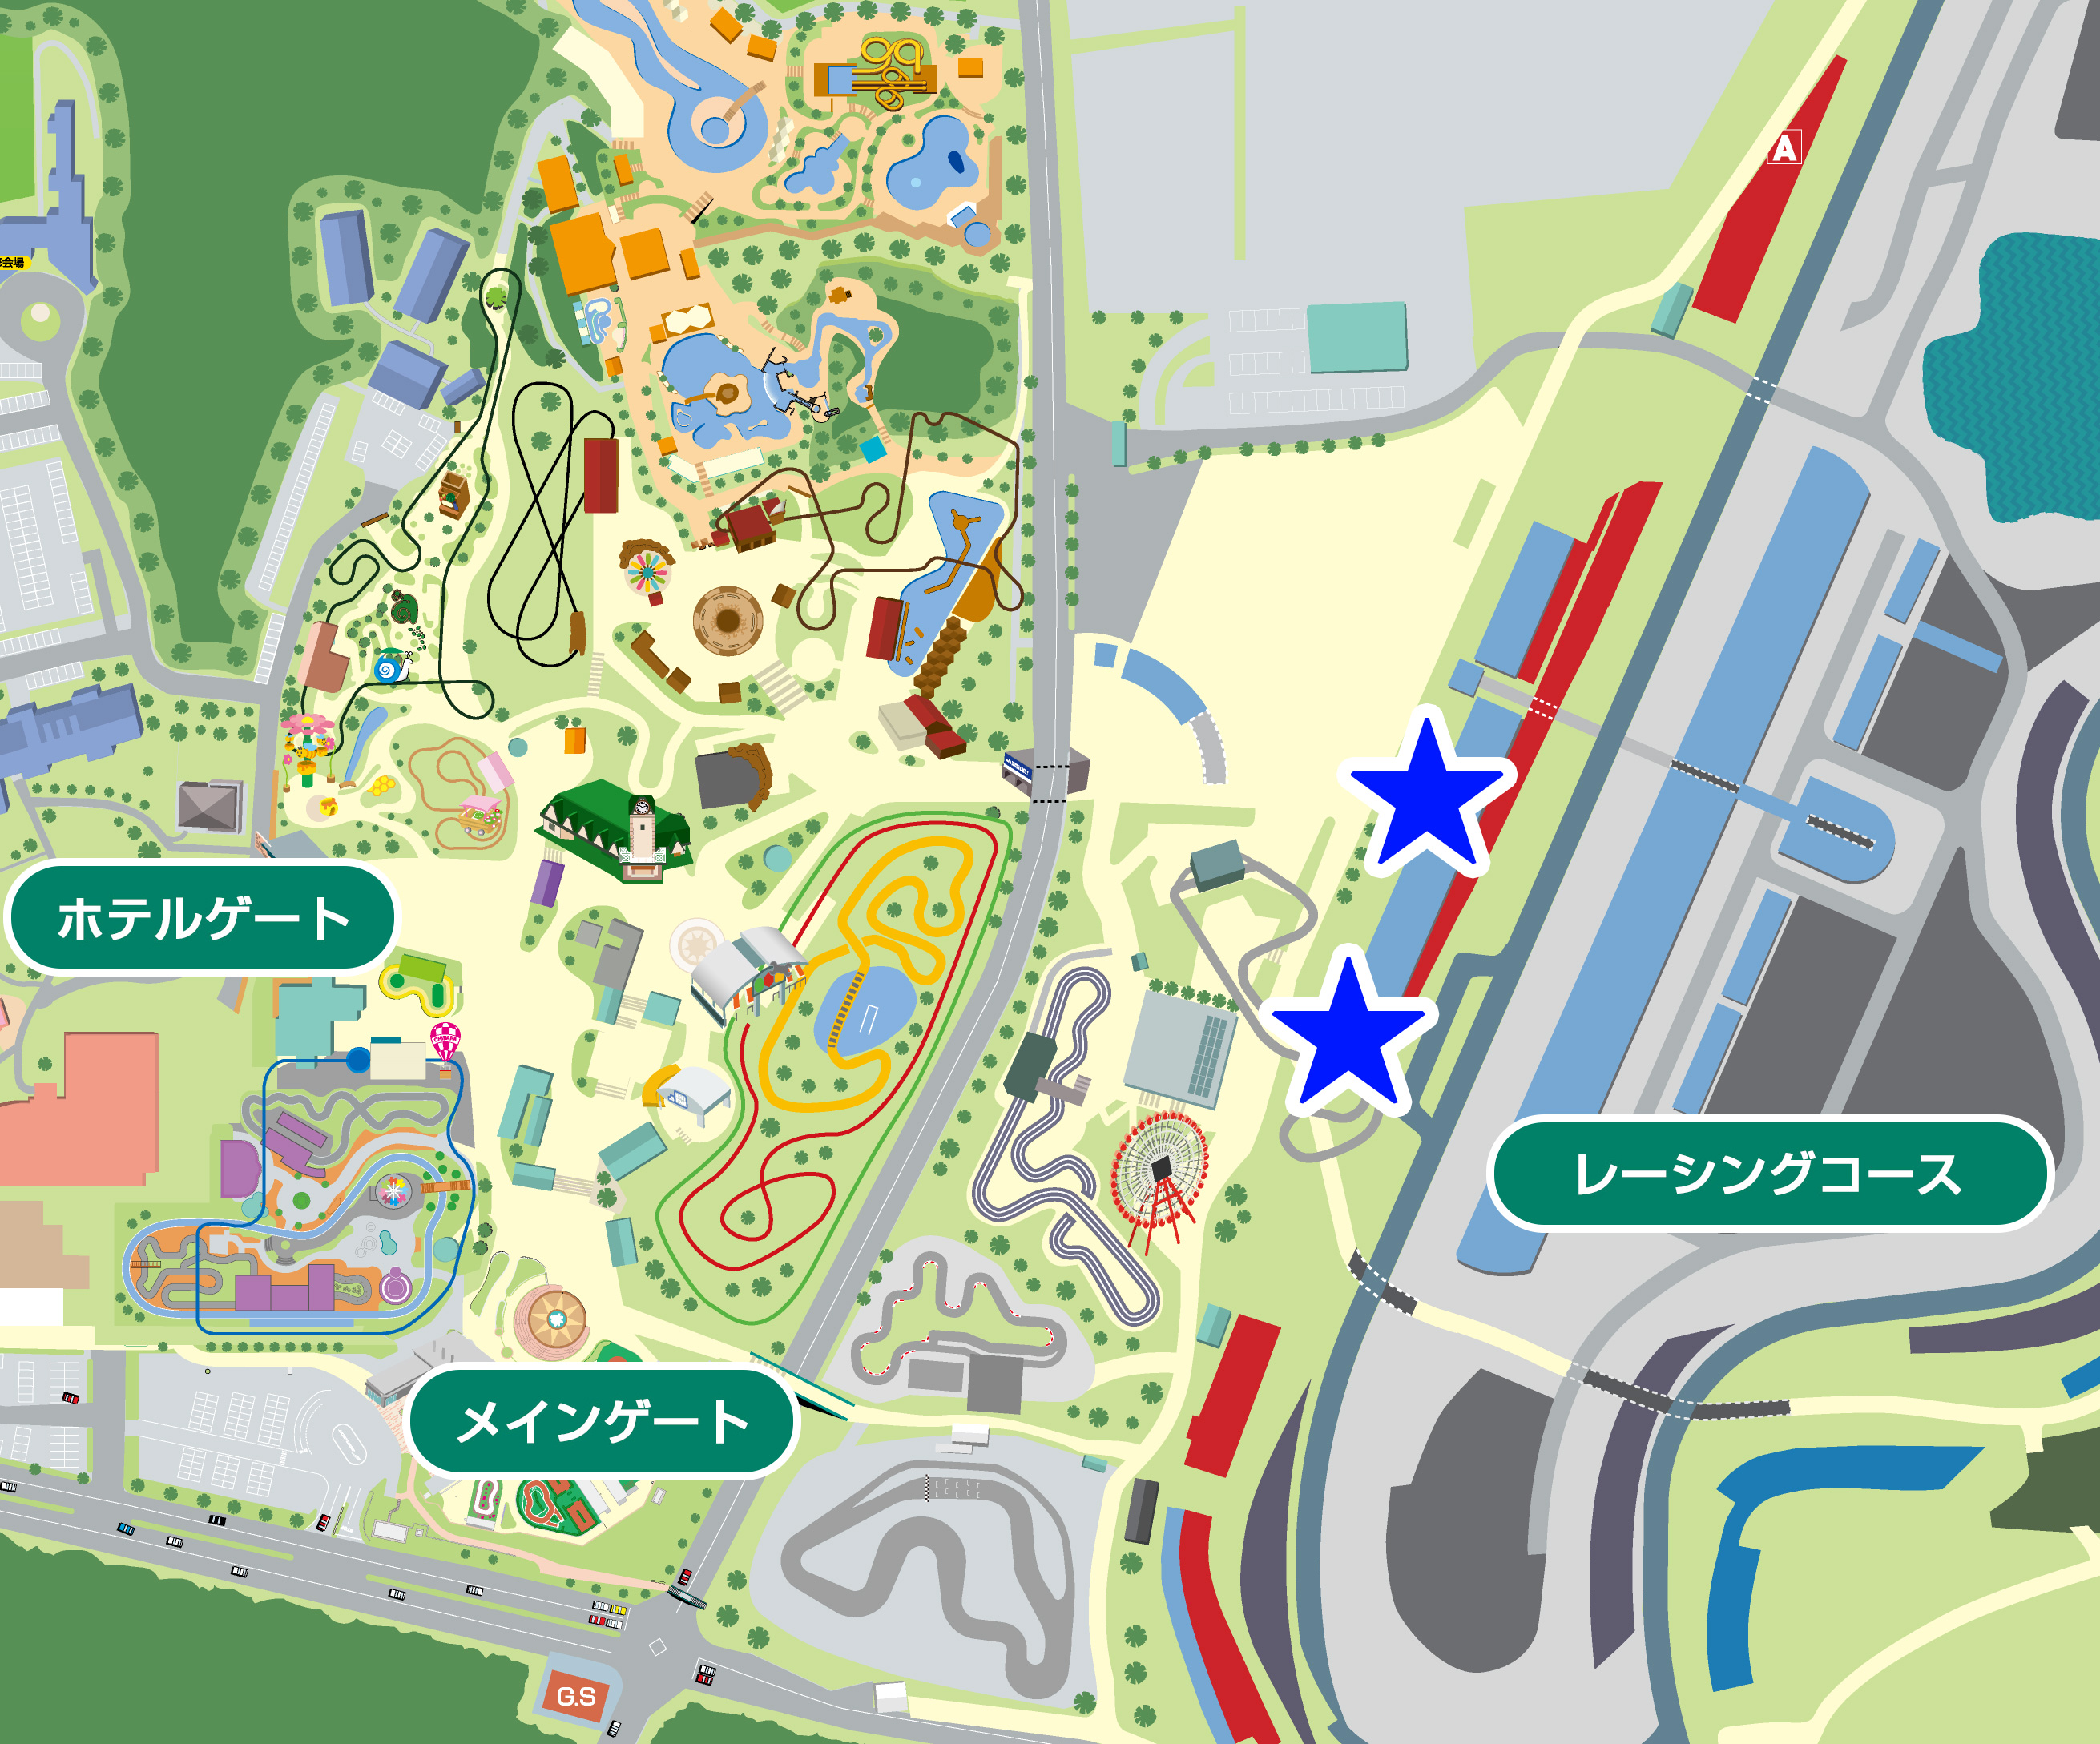 Map, toilets, and restaurants are nearby with excellent surroundings! Seats are also close to the Suzuka Circuit Park area.